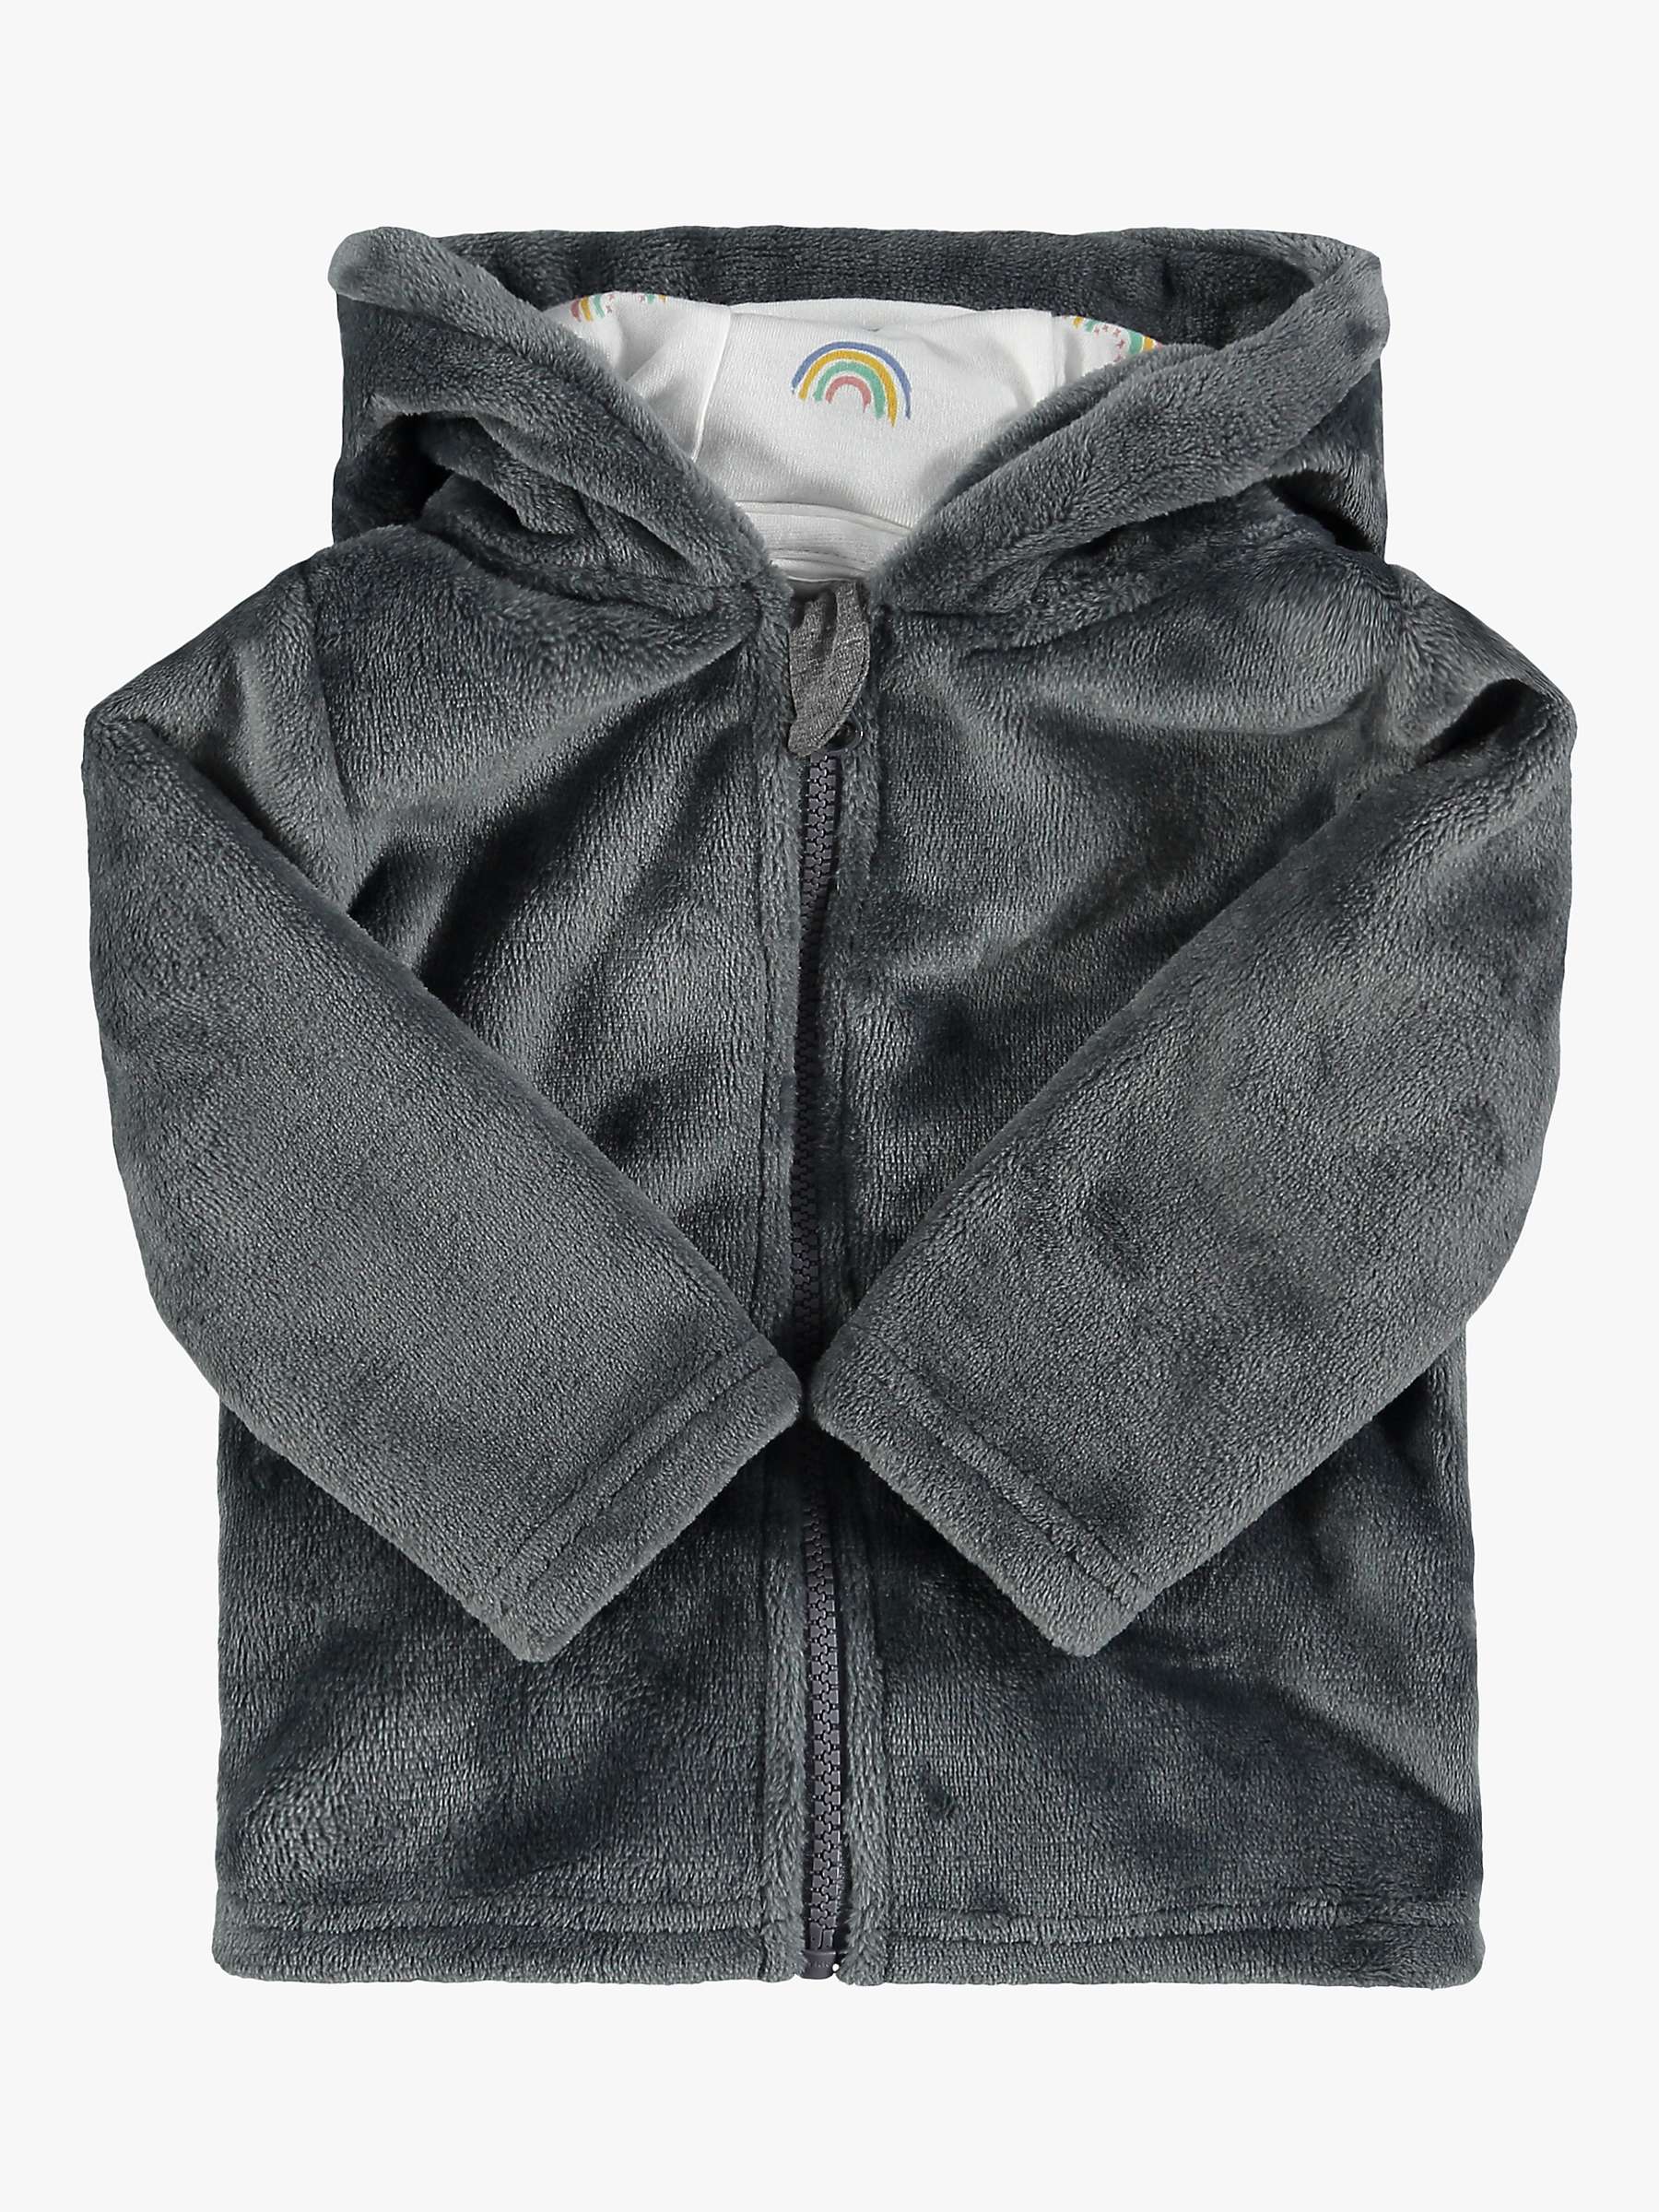 Buy From Babies with Love Kindness is Magic Teddy Fleece Hoodie, Charcoal Grey Online at johnlewis.com